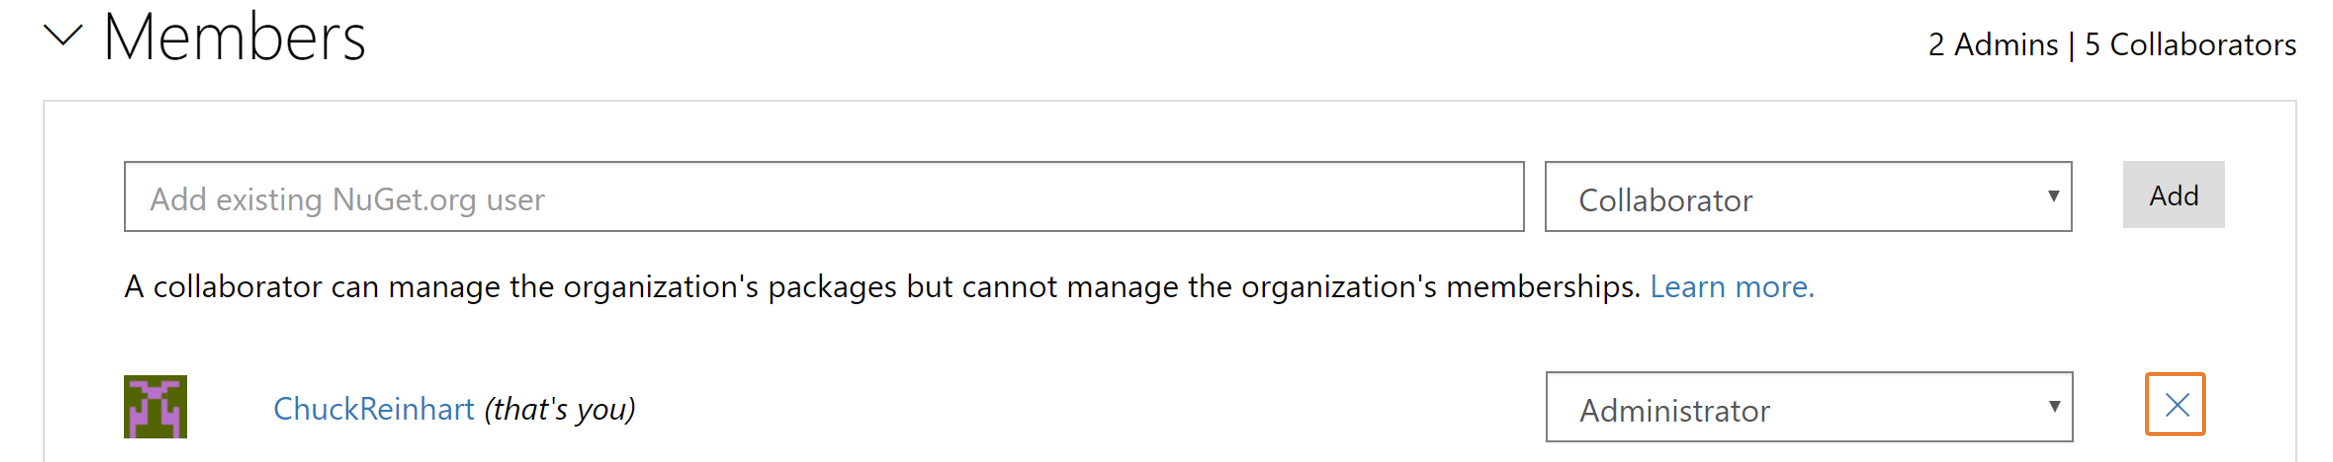 Removing a user account from an organization